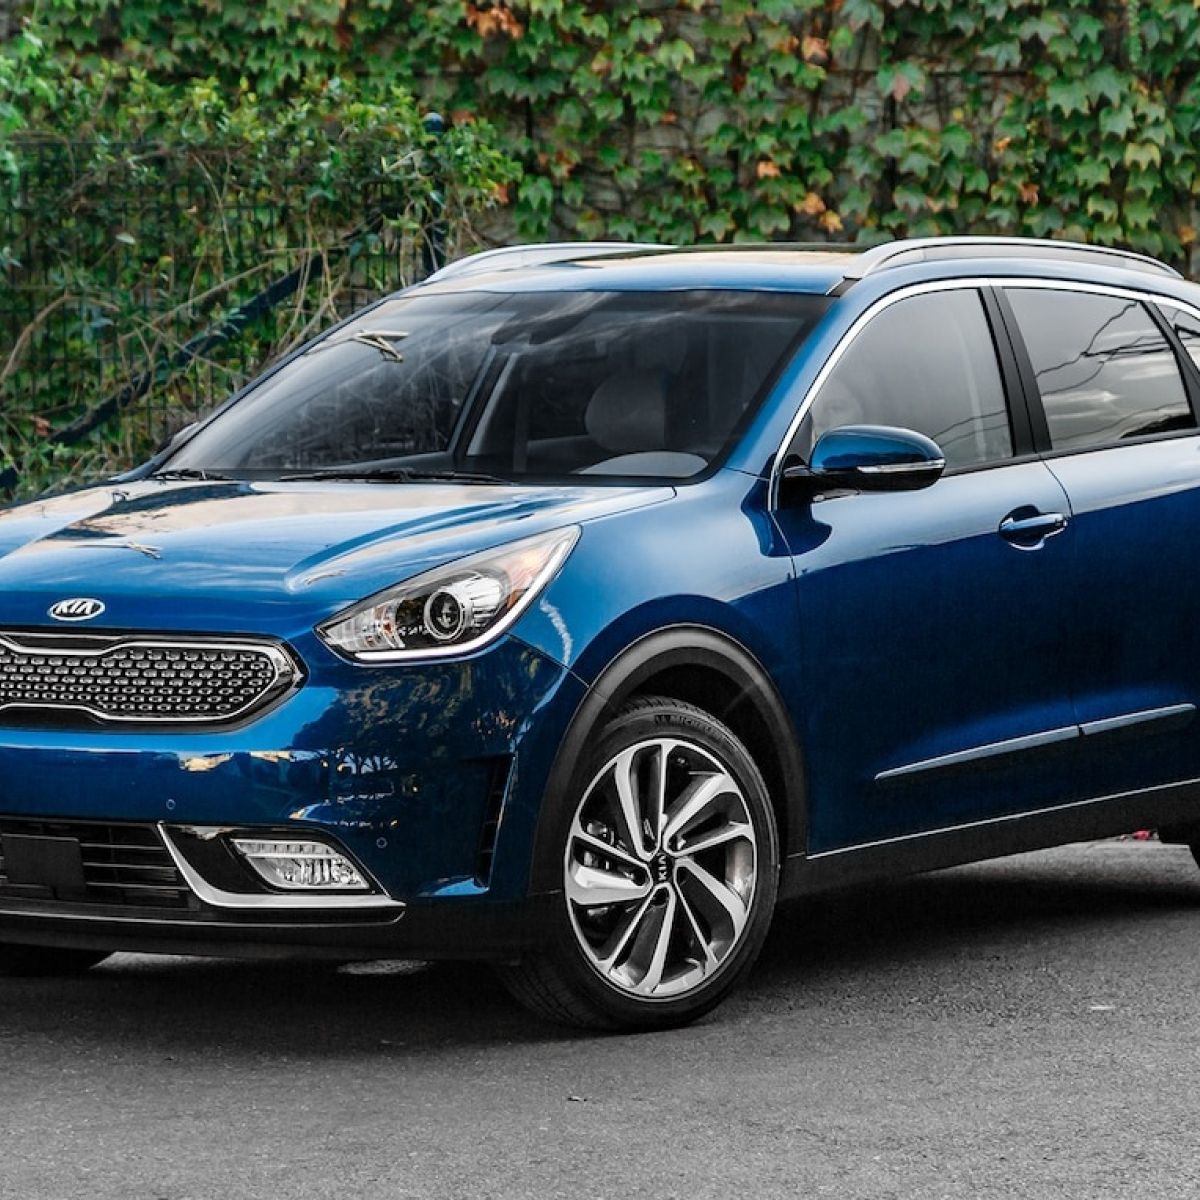 27: Kia – Not the raging bull but hybrid sets the pace